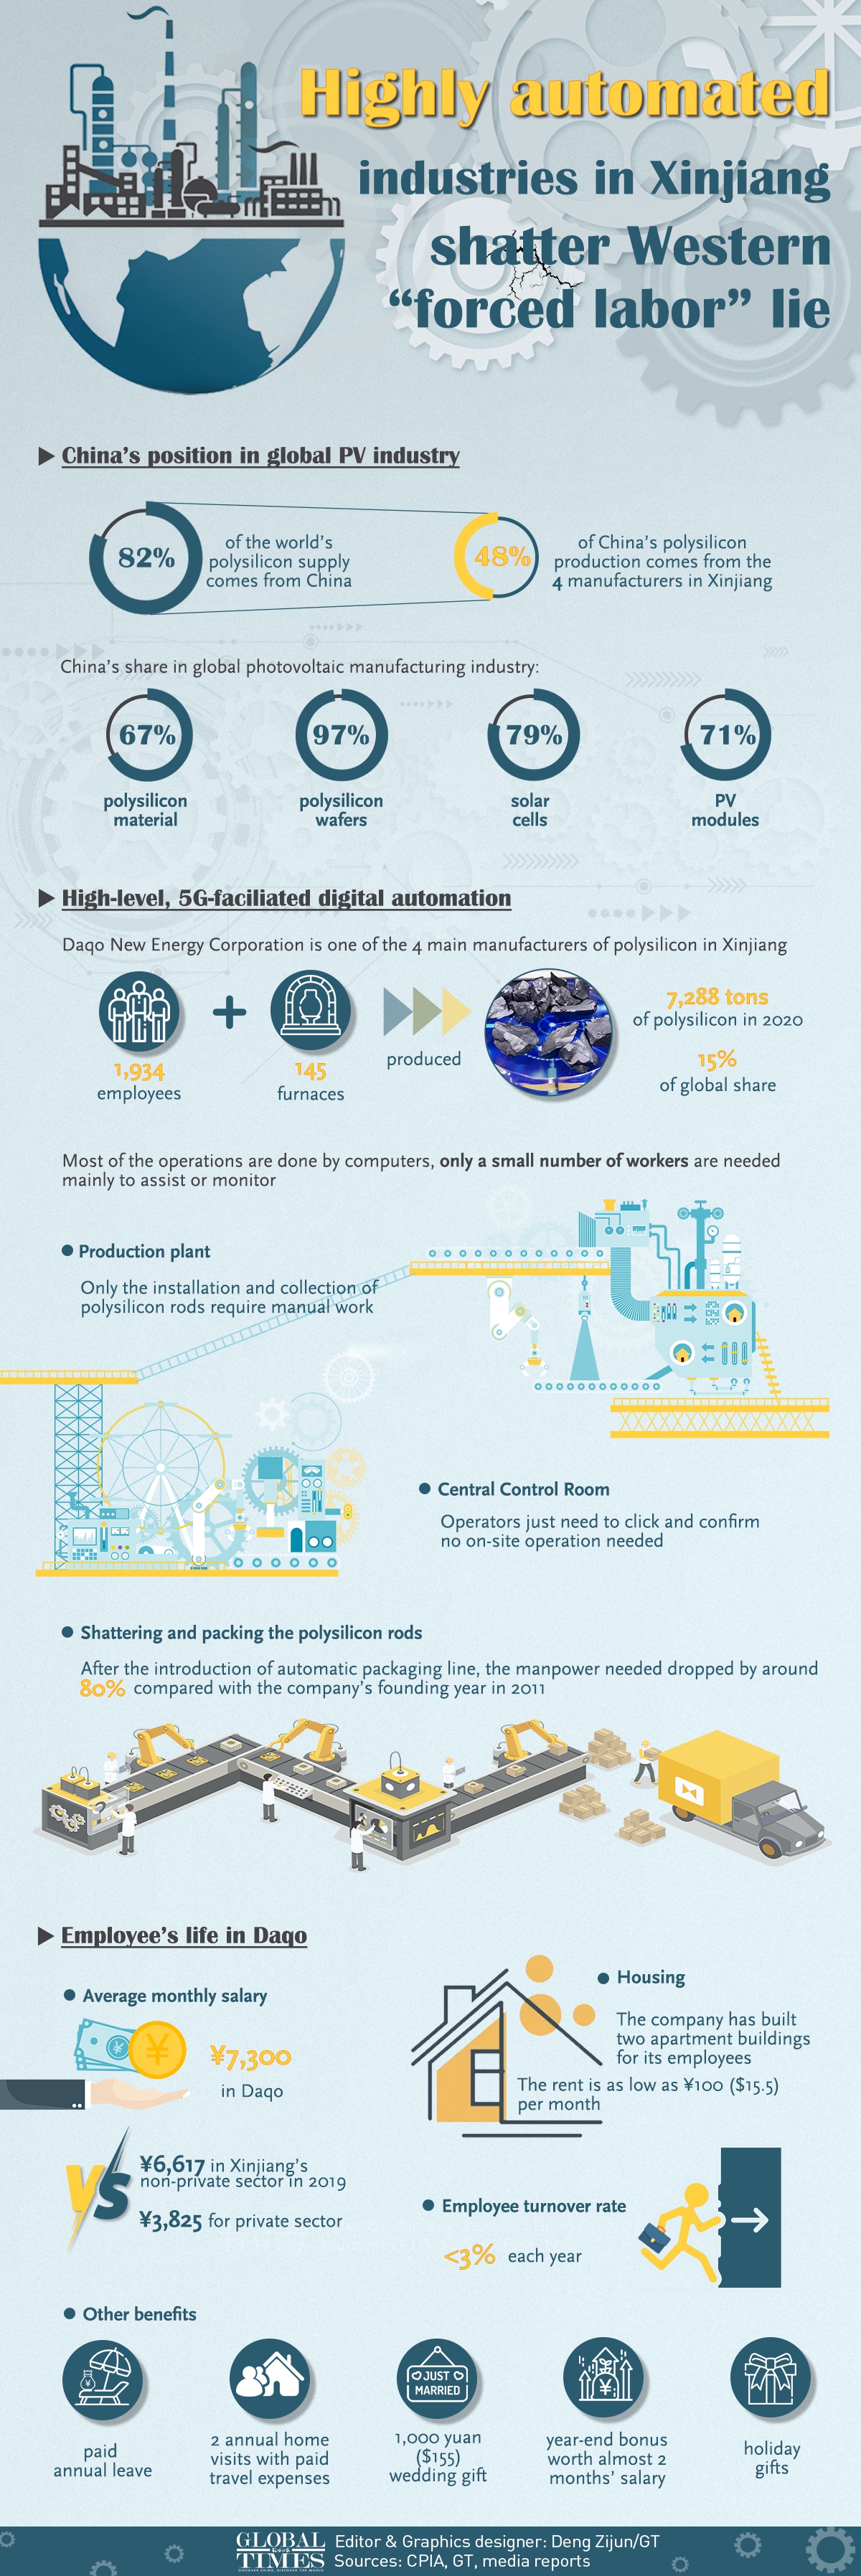 Highly automated industries in Xinjiang shatter Western “forced labor” lie Infographic: Deng Zijun/GT